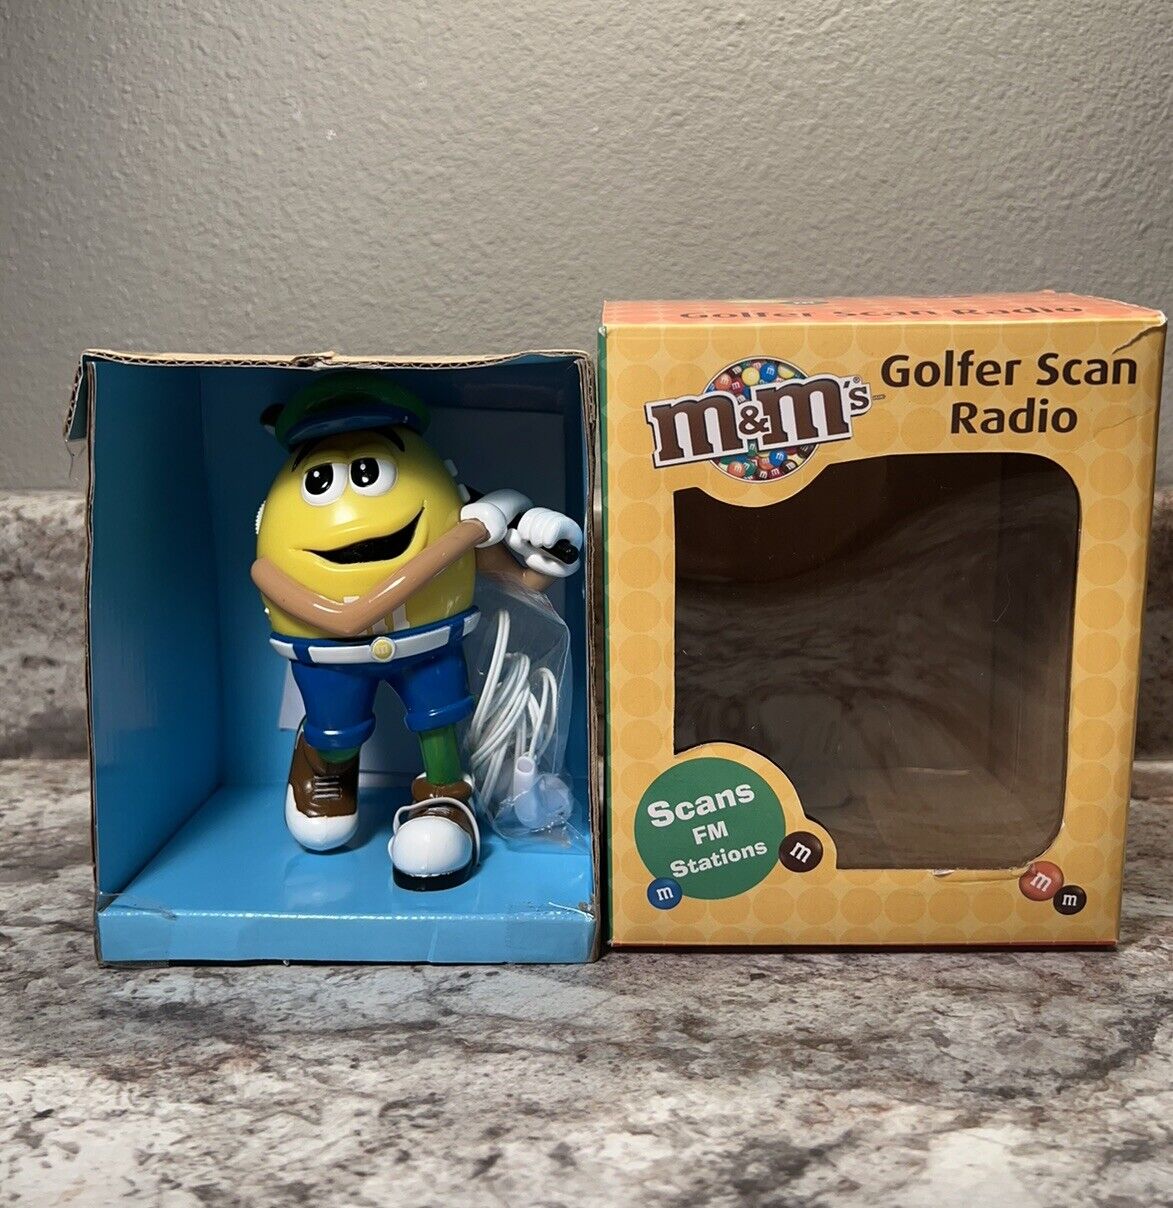 Rare 2009 Mars Inc. Yellow M&M\'s Golfer Scan Radio collectible Scans FM Stations